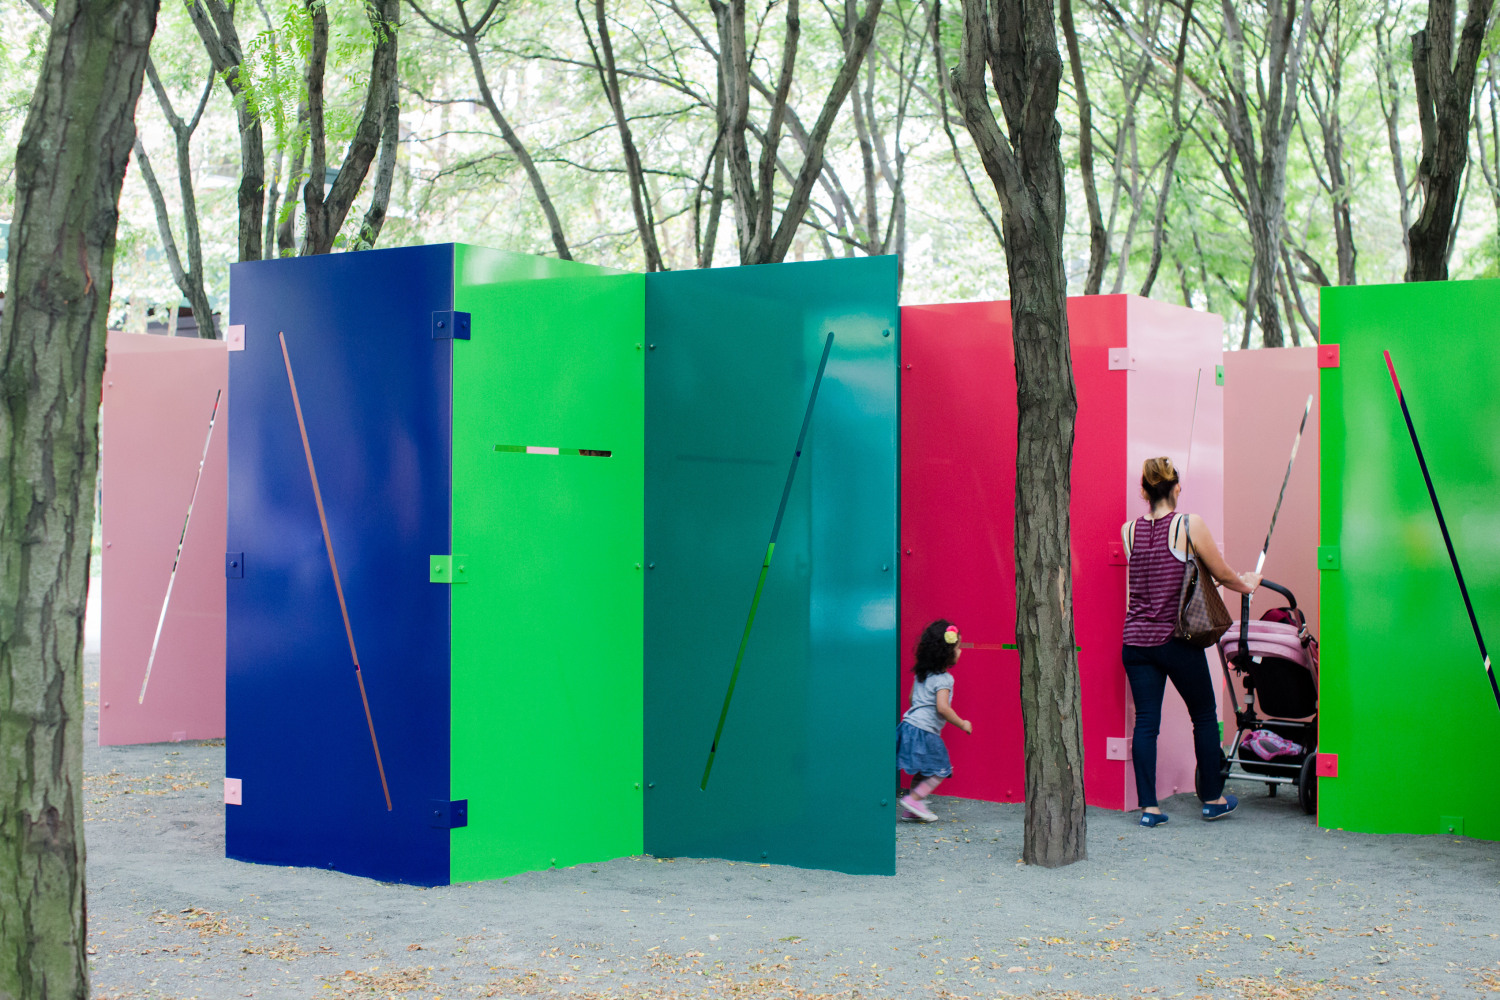 Sam Falls

Untitled (Maze)

2014

UV powder coated aluminum, Non-UV powder coated aluminum, UV exterior powder coated stainless steel brackets

96 x 312 x 312 inches (243.8 x 792.5 x 792.5 cm)

Installation view:&amp;nbsp;Light Over Time, Public Art Fund, New York, 2014

&amp;nbsp;

INQUIRE